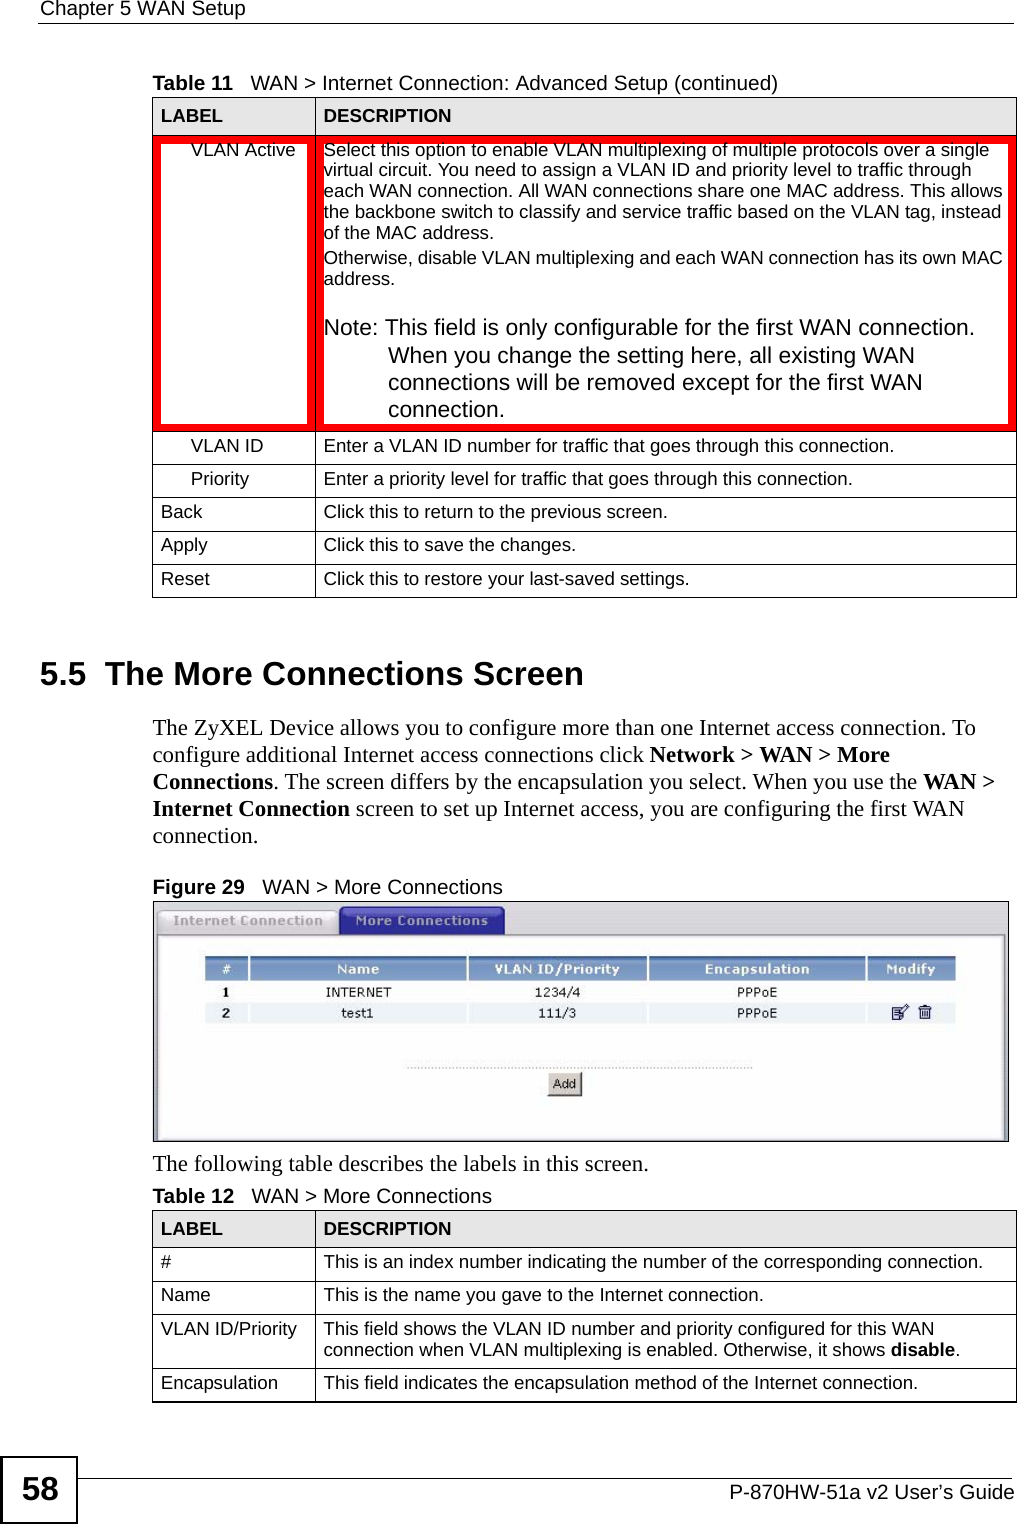 Chapter 5 WAN SetupP-870HW-51a v2 User’s Guide585.5  The More Connections Screen The ZyXEL Device allows you to configure more than one Internet access connection. To configure additional Internet access connections click Network &gt; WAN &gt; More Connections. The screen differs by the encapsulation you select. When you use the WAN &gt; Internet Connection screen to set up Internet access, you are configuring the first WAN connection. Figure 29   WAN &gt; More ConnectionsThe following table describes the labels in this screen.  VLAN Active Select this option to enable VLAN multiplexing of multiple protocols over a single virtual circuit. You need to assign a VLAN ID and priority level to traffic through each WAN connection. All WAN connections share one MAC address. This allows the backbone switch to classify and service traffic based on the VLAN tag, instead of the MAC address.Otherwise, disable VLAN multiplexing and each WAN connection has its own MAC address.Note: This field is only configurable for the first WAN connection. When you change the setting here, all existing WAN connections will be removed except for the first WAN connection.VLAN ID Enter a VLAN ID number for traffic that goes through this connection.Priority Enter a priority level for traffic that goes through this connection.Back Click this to return to the previous screen.Apply Click this to save the changes. Reset Click this to restore your last-saved settings.Table 11   WAN &gt; Internet Connection: Advanced Setup (continued)LABEL DESCRIPTIONTable 12   WAN &gt; More ConnectionsLABEL DESCRIPTION# This is an index number indicating the number of the corresponding connection.Name This is the name you gave to the Internet connection.VLAN ID/Priority This field shows the VLAN ID number and priority configured for this WAN connection when VLAN multiplexing is enabled. Otherwise, it shows disable.Encapsulation This field indicates the encapsulation method of the Internet connection.